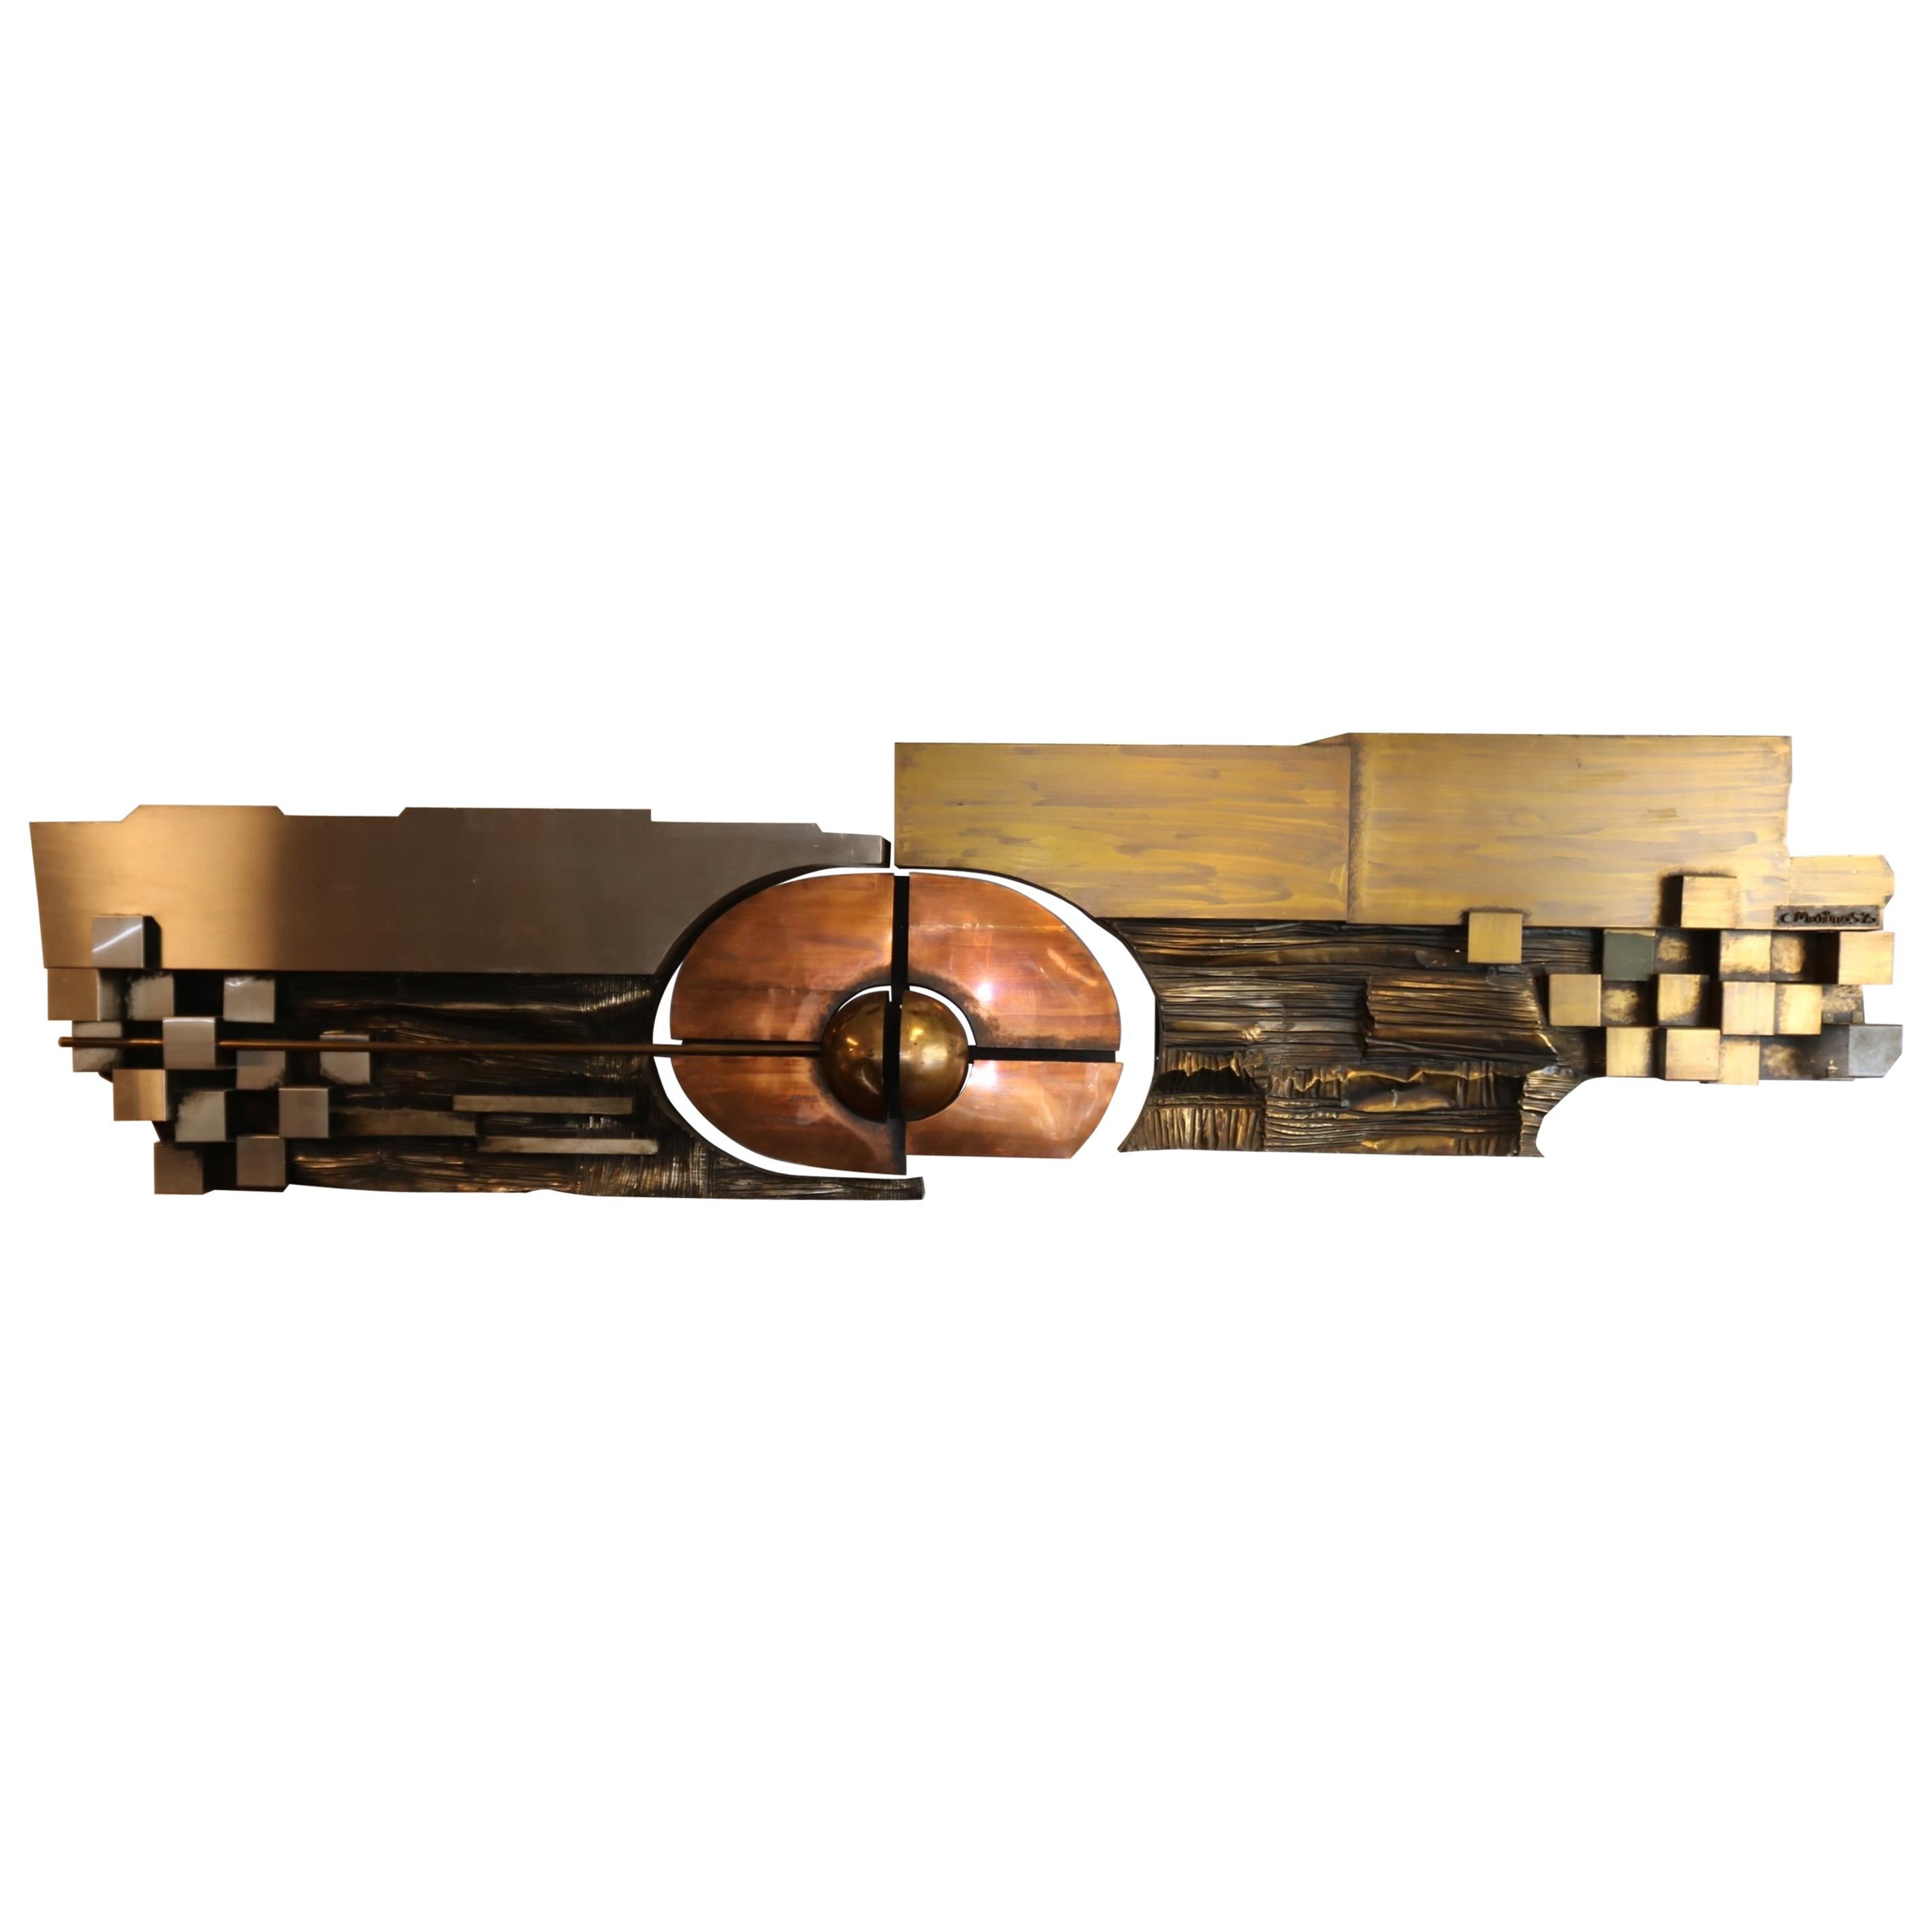 XL Hammered Copper, Brass and Steel Artwork by Carlos Marinas, 1975 For Sale